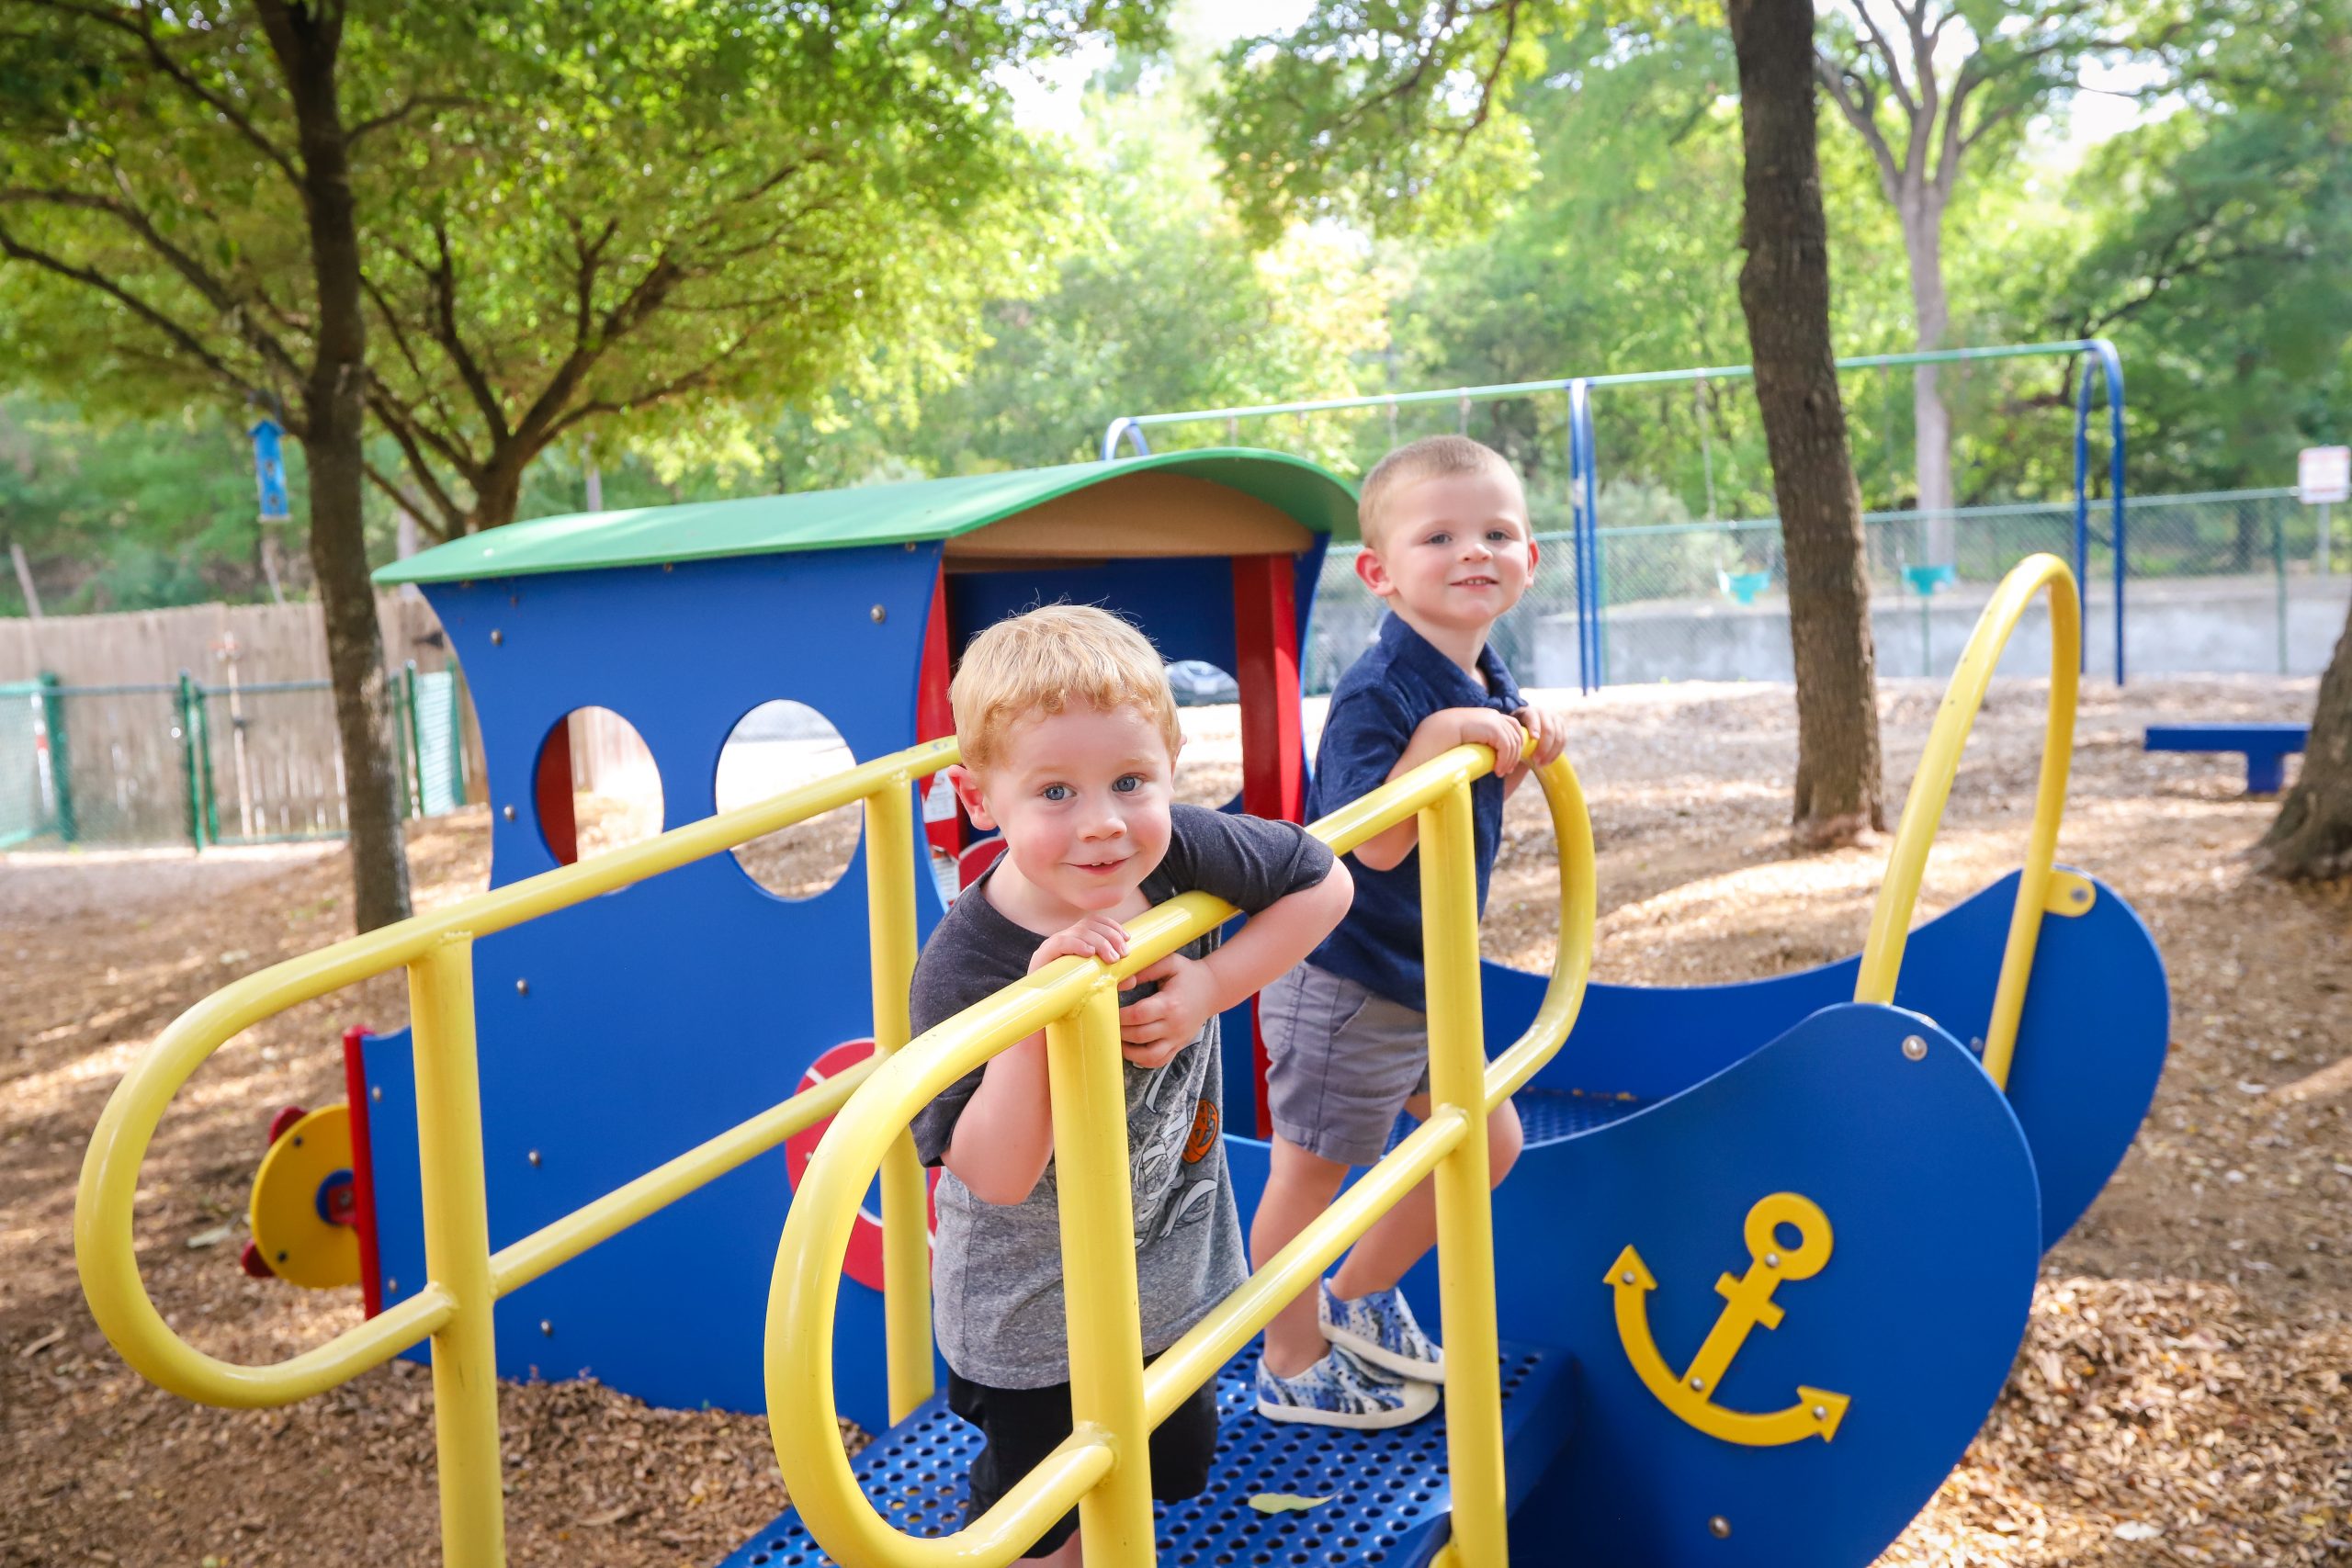 Our modern San Antonio and Austin Childcare Playgrounds